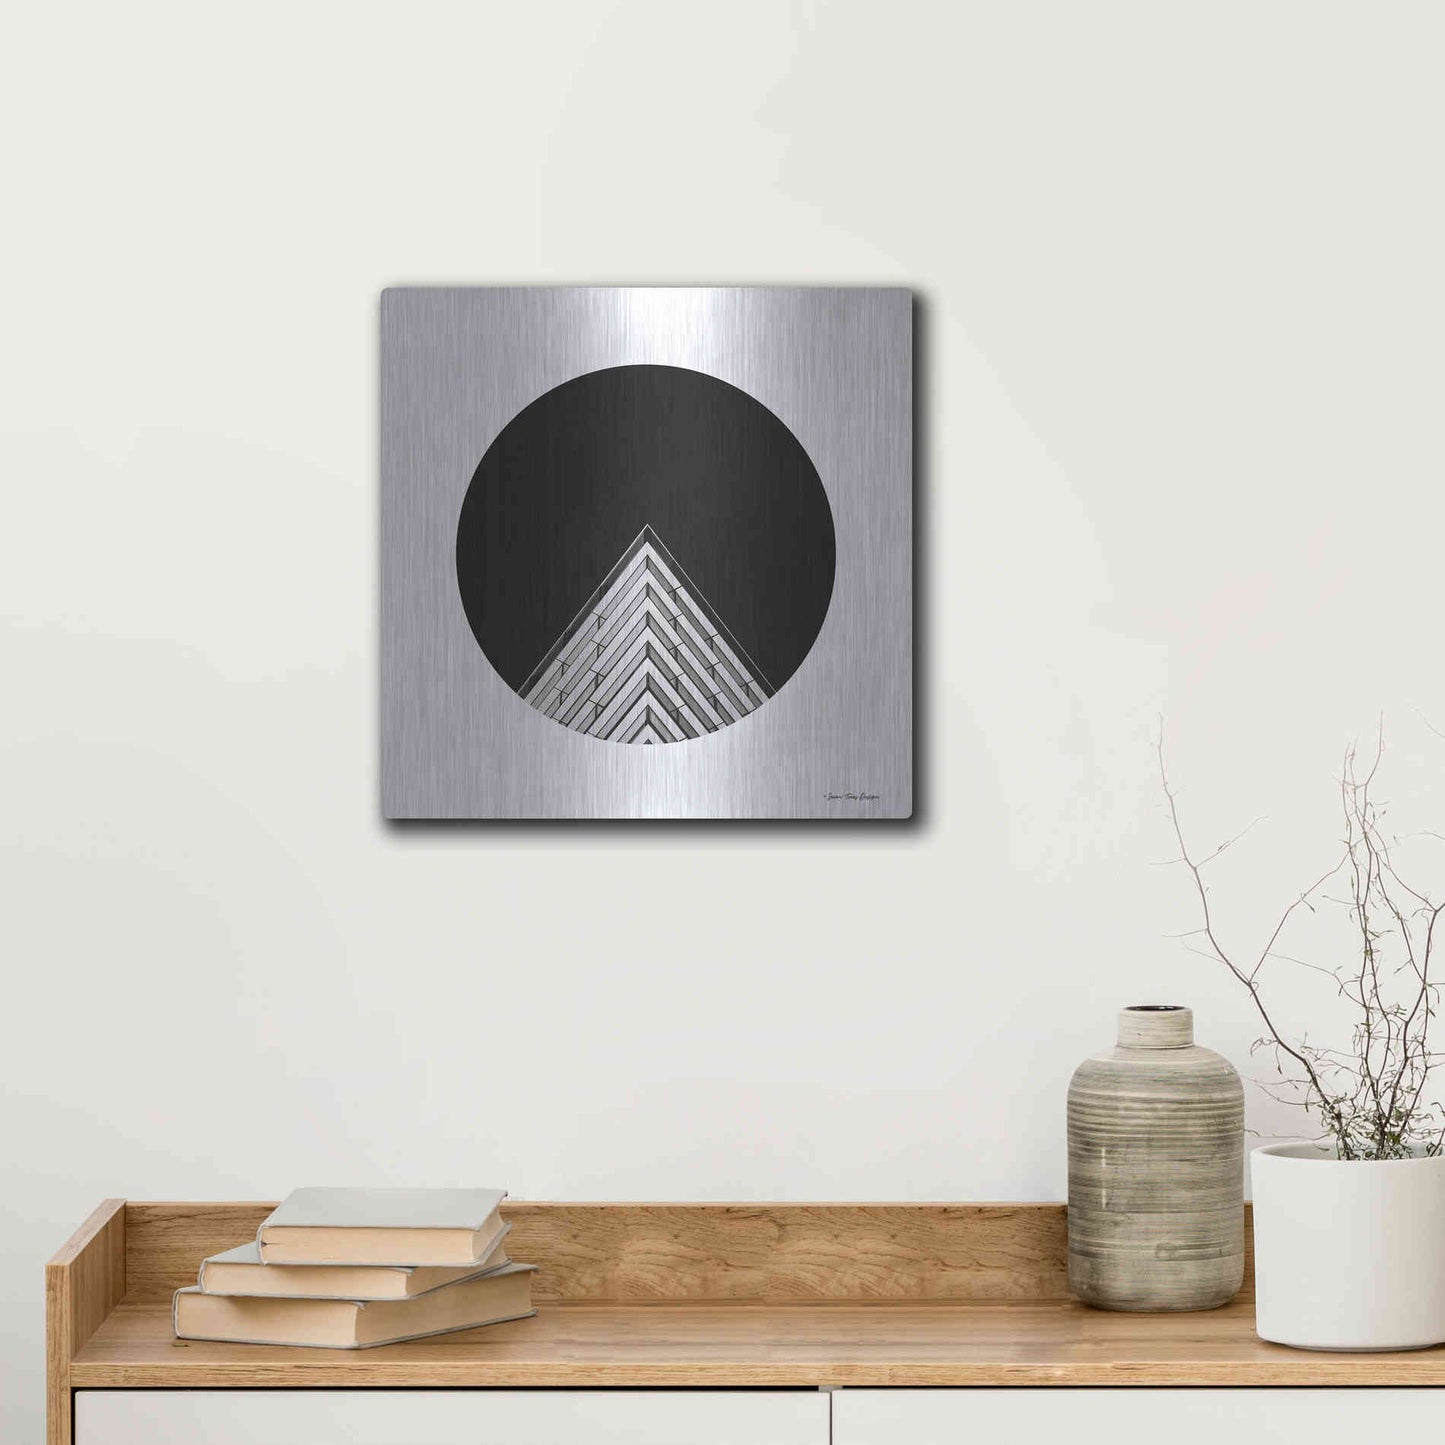 Luxe Metal Art 'Triangular Architecture' by Seven Trees Design, Metal Wall Art,12x12